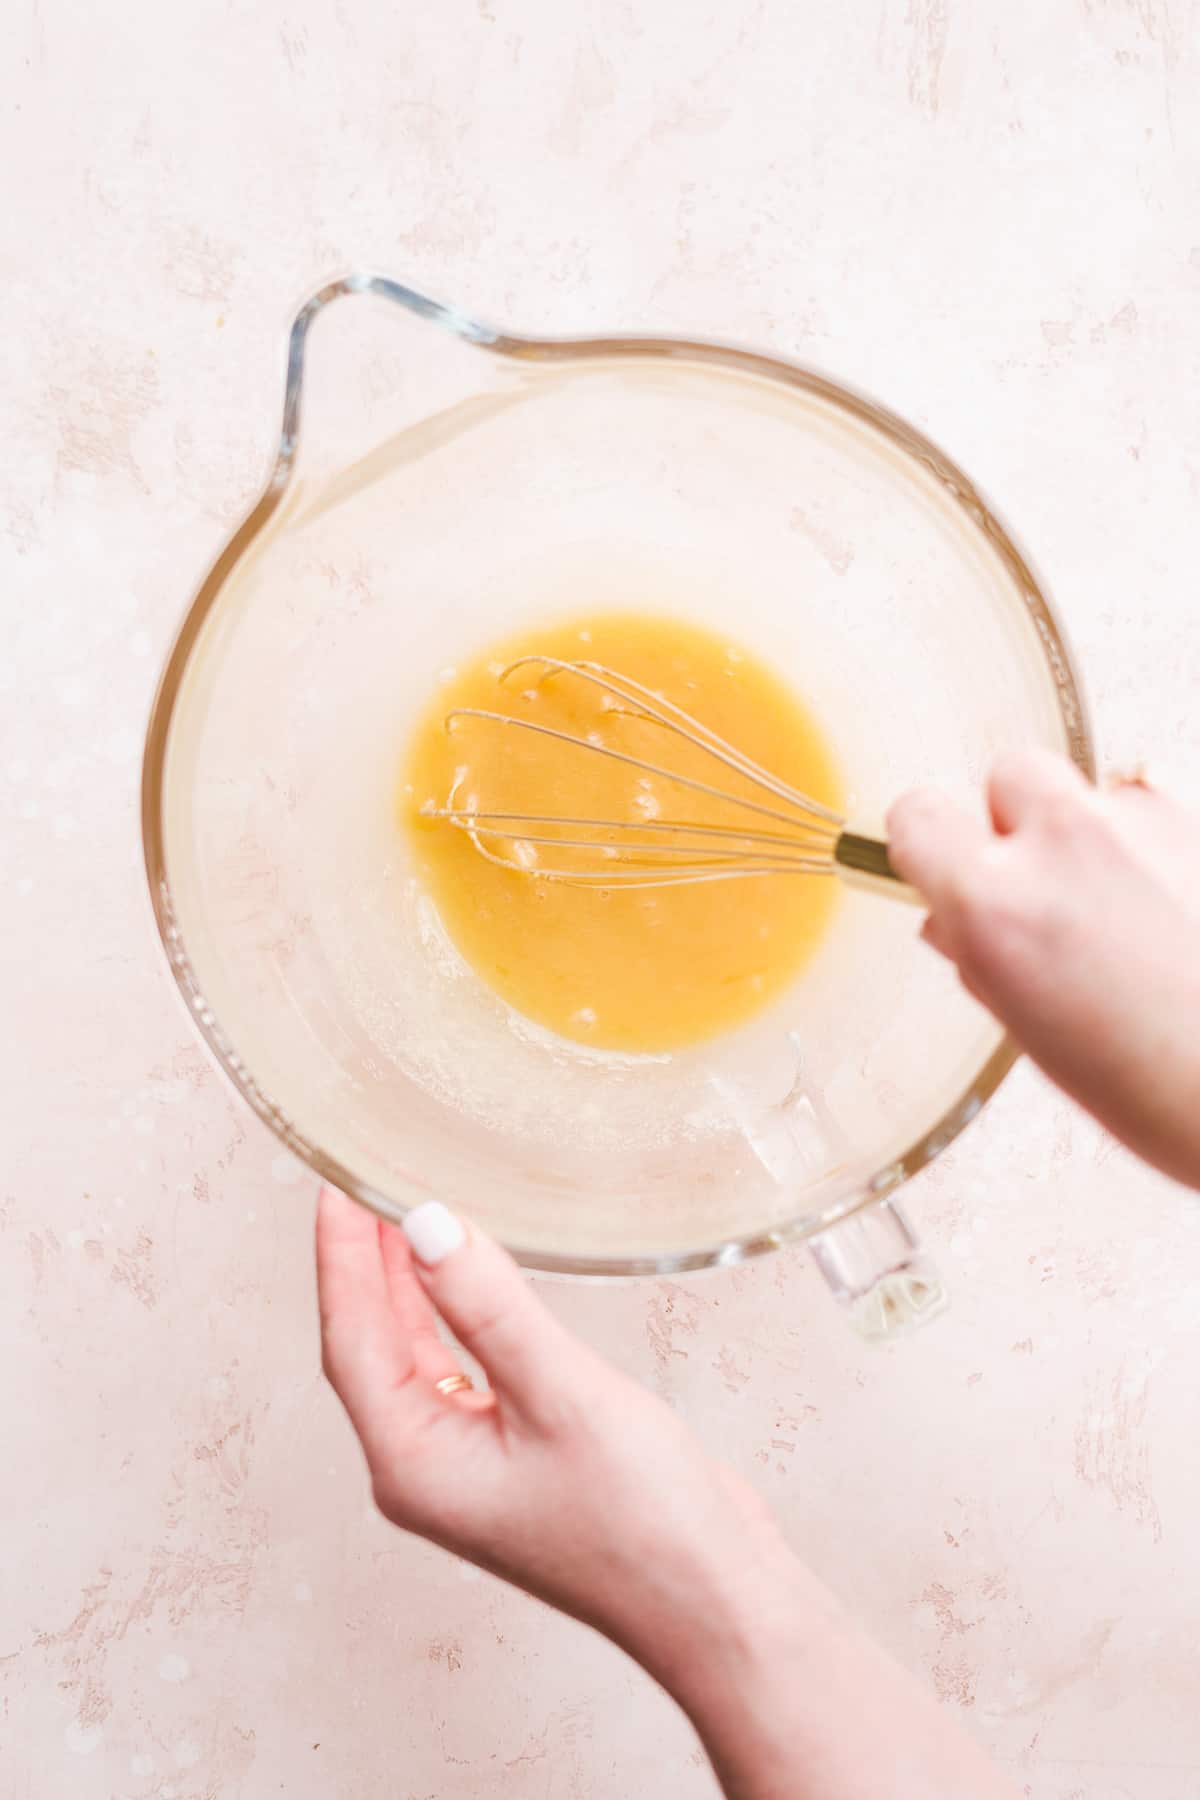 Hand whisking ingredients in glass bowl.